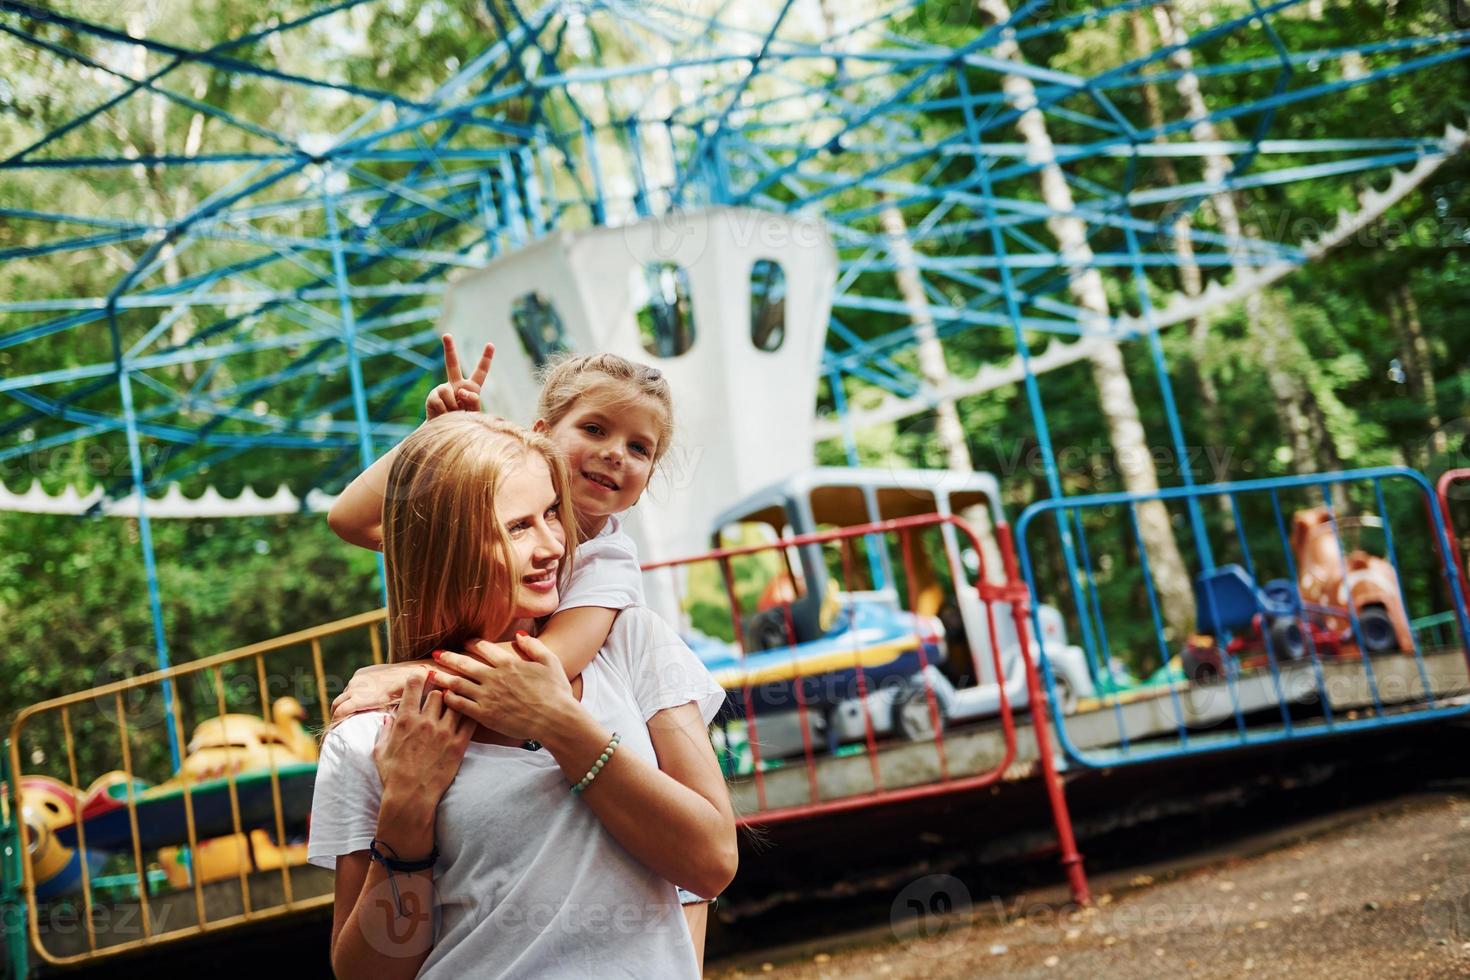 Loving each other. Cheerful little girl her mother have a good time in the park together near attractions photo